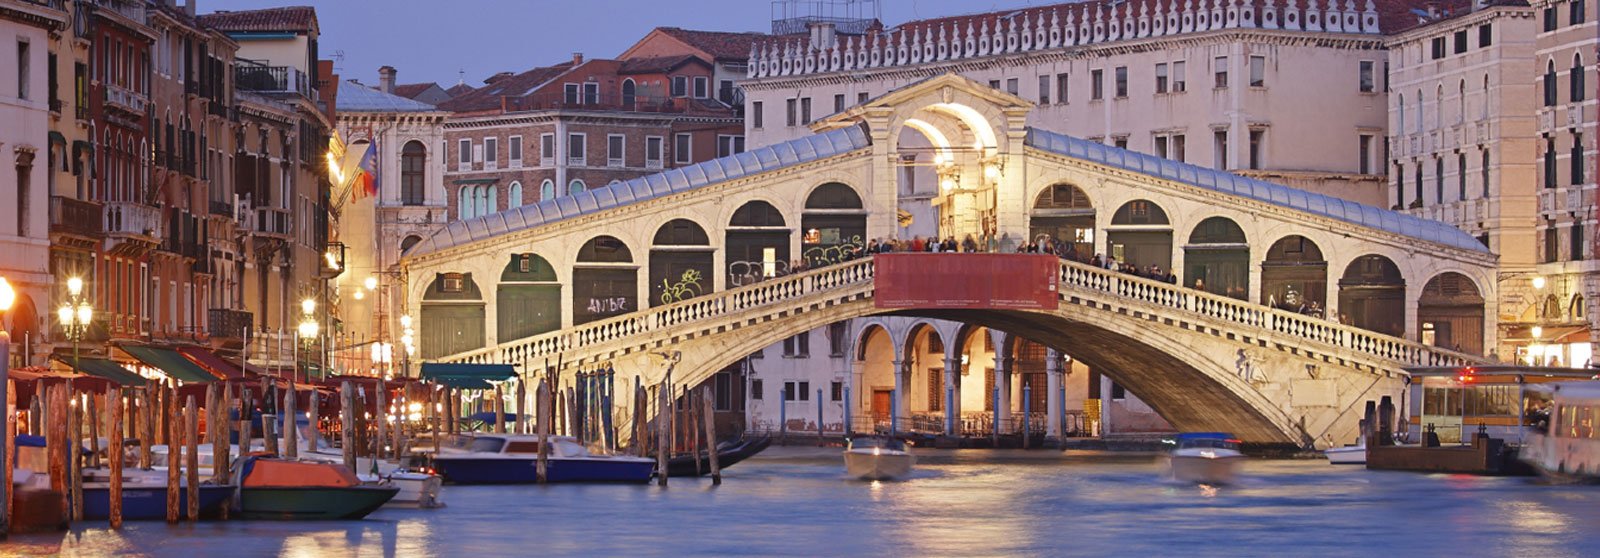 The Michelin-starred restaurants in Venice: how to choose the best one